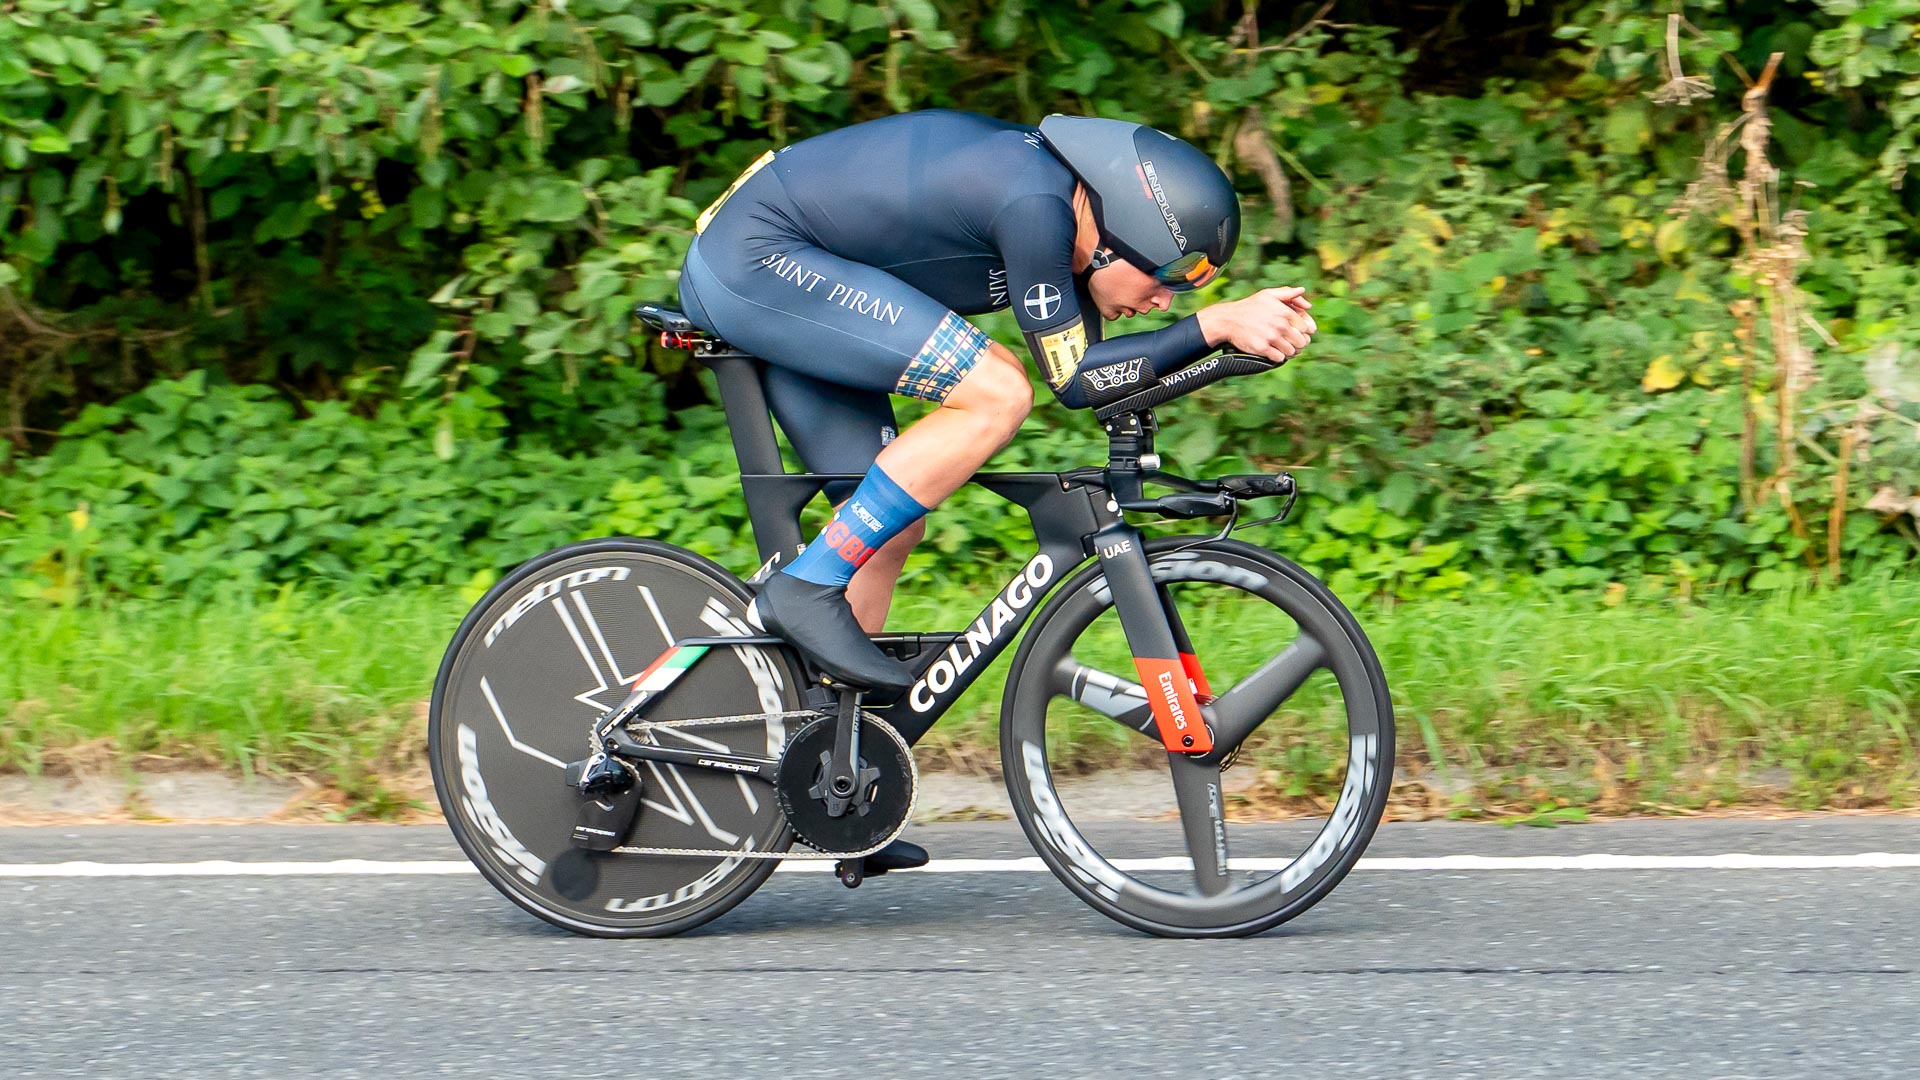 The image shows Josh Charlton of St Piran riding a Colnago time trial bike with an Endura TT helmet. Charlton is riding in the time trial position and is clearly moving at speed. The background is overgrown hedge or ditch reaching right up to the roads edge.